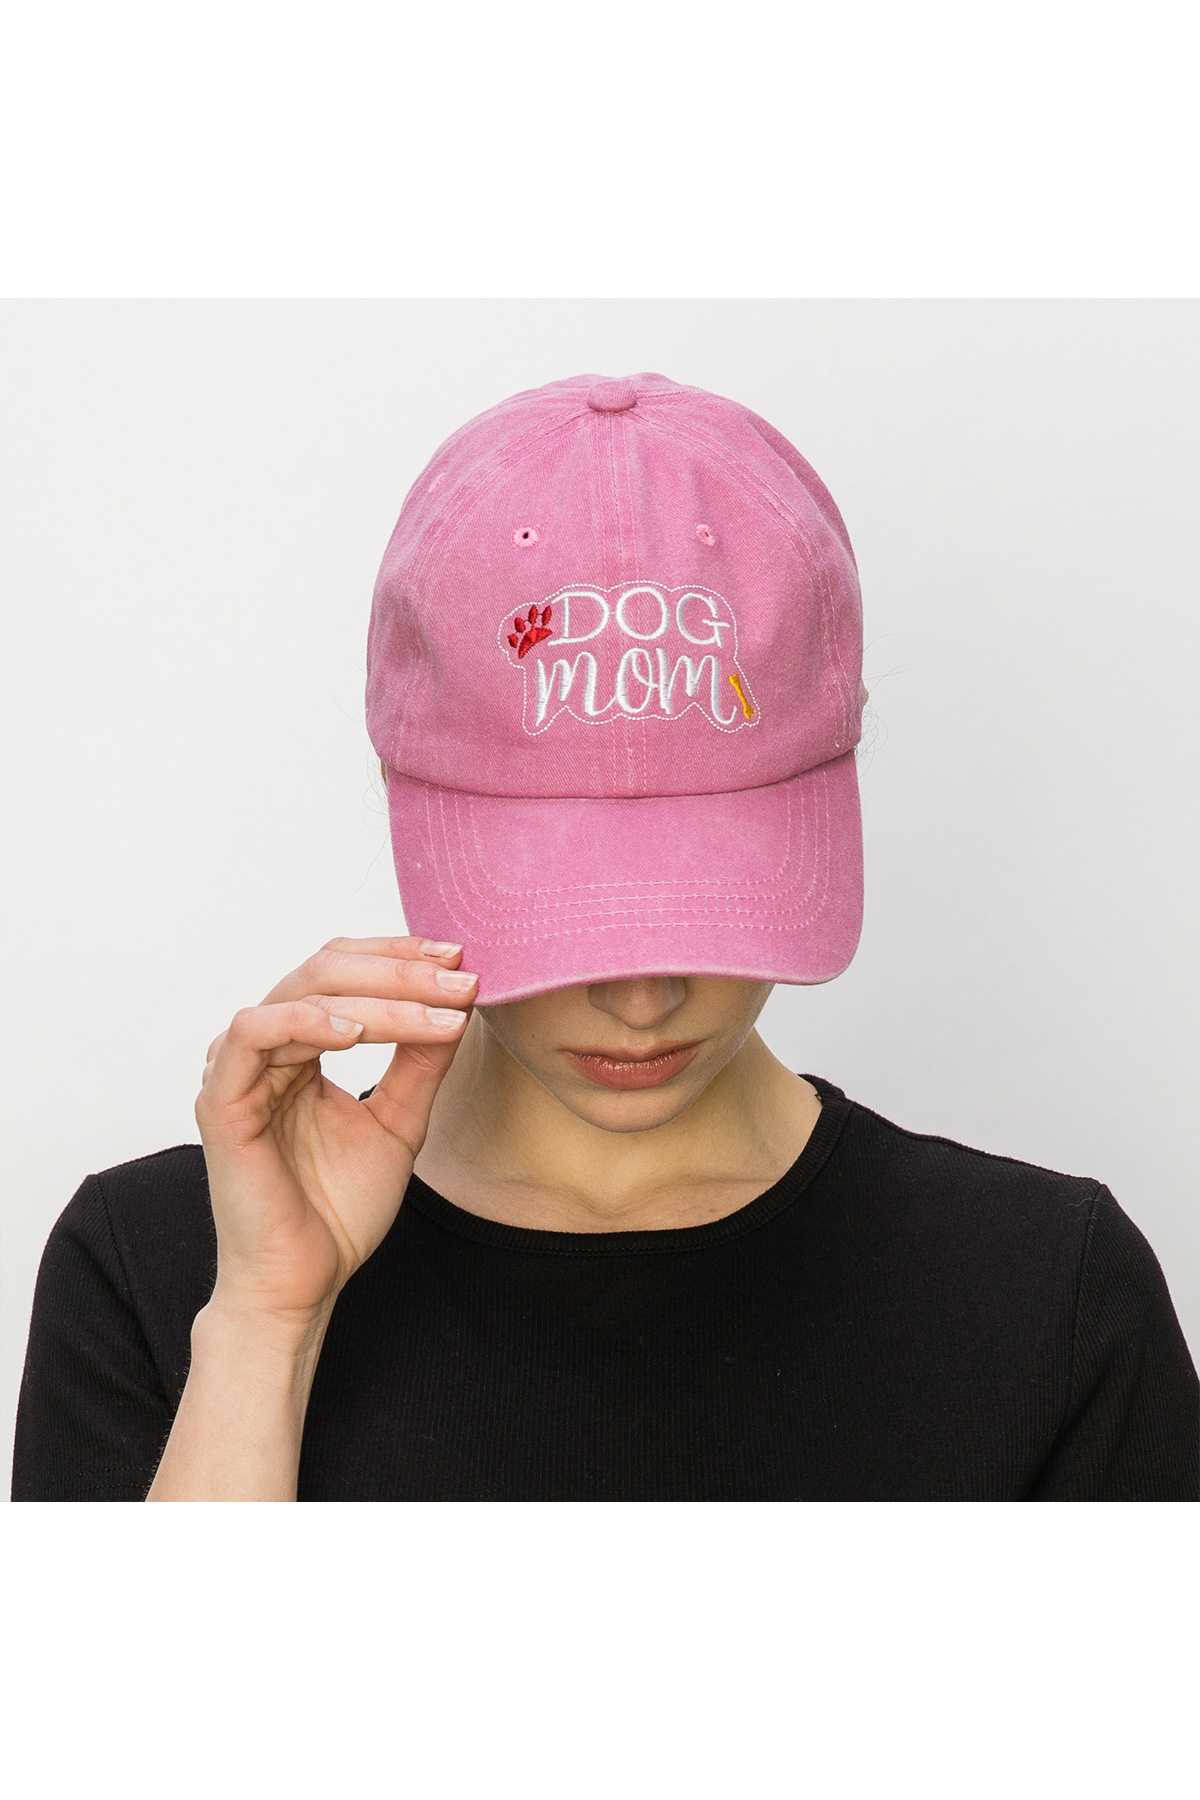 DOG MOM Embroidery Pigment Cap